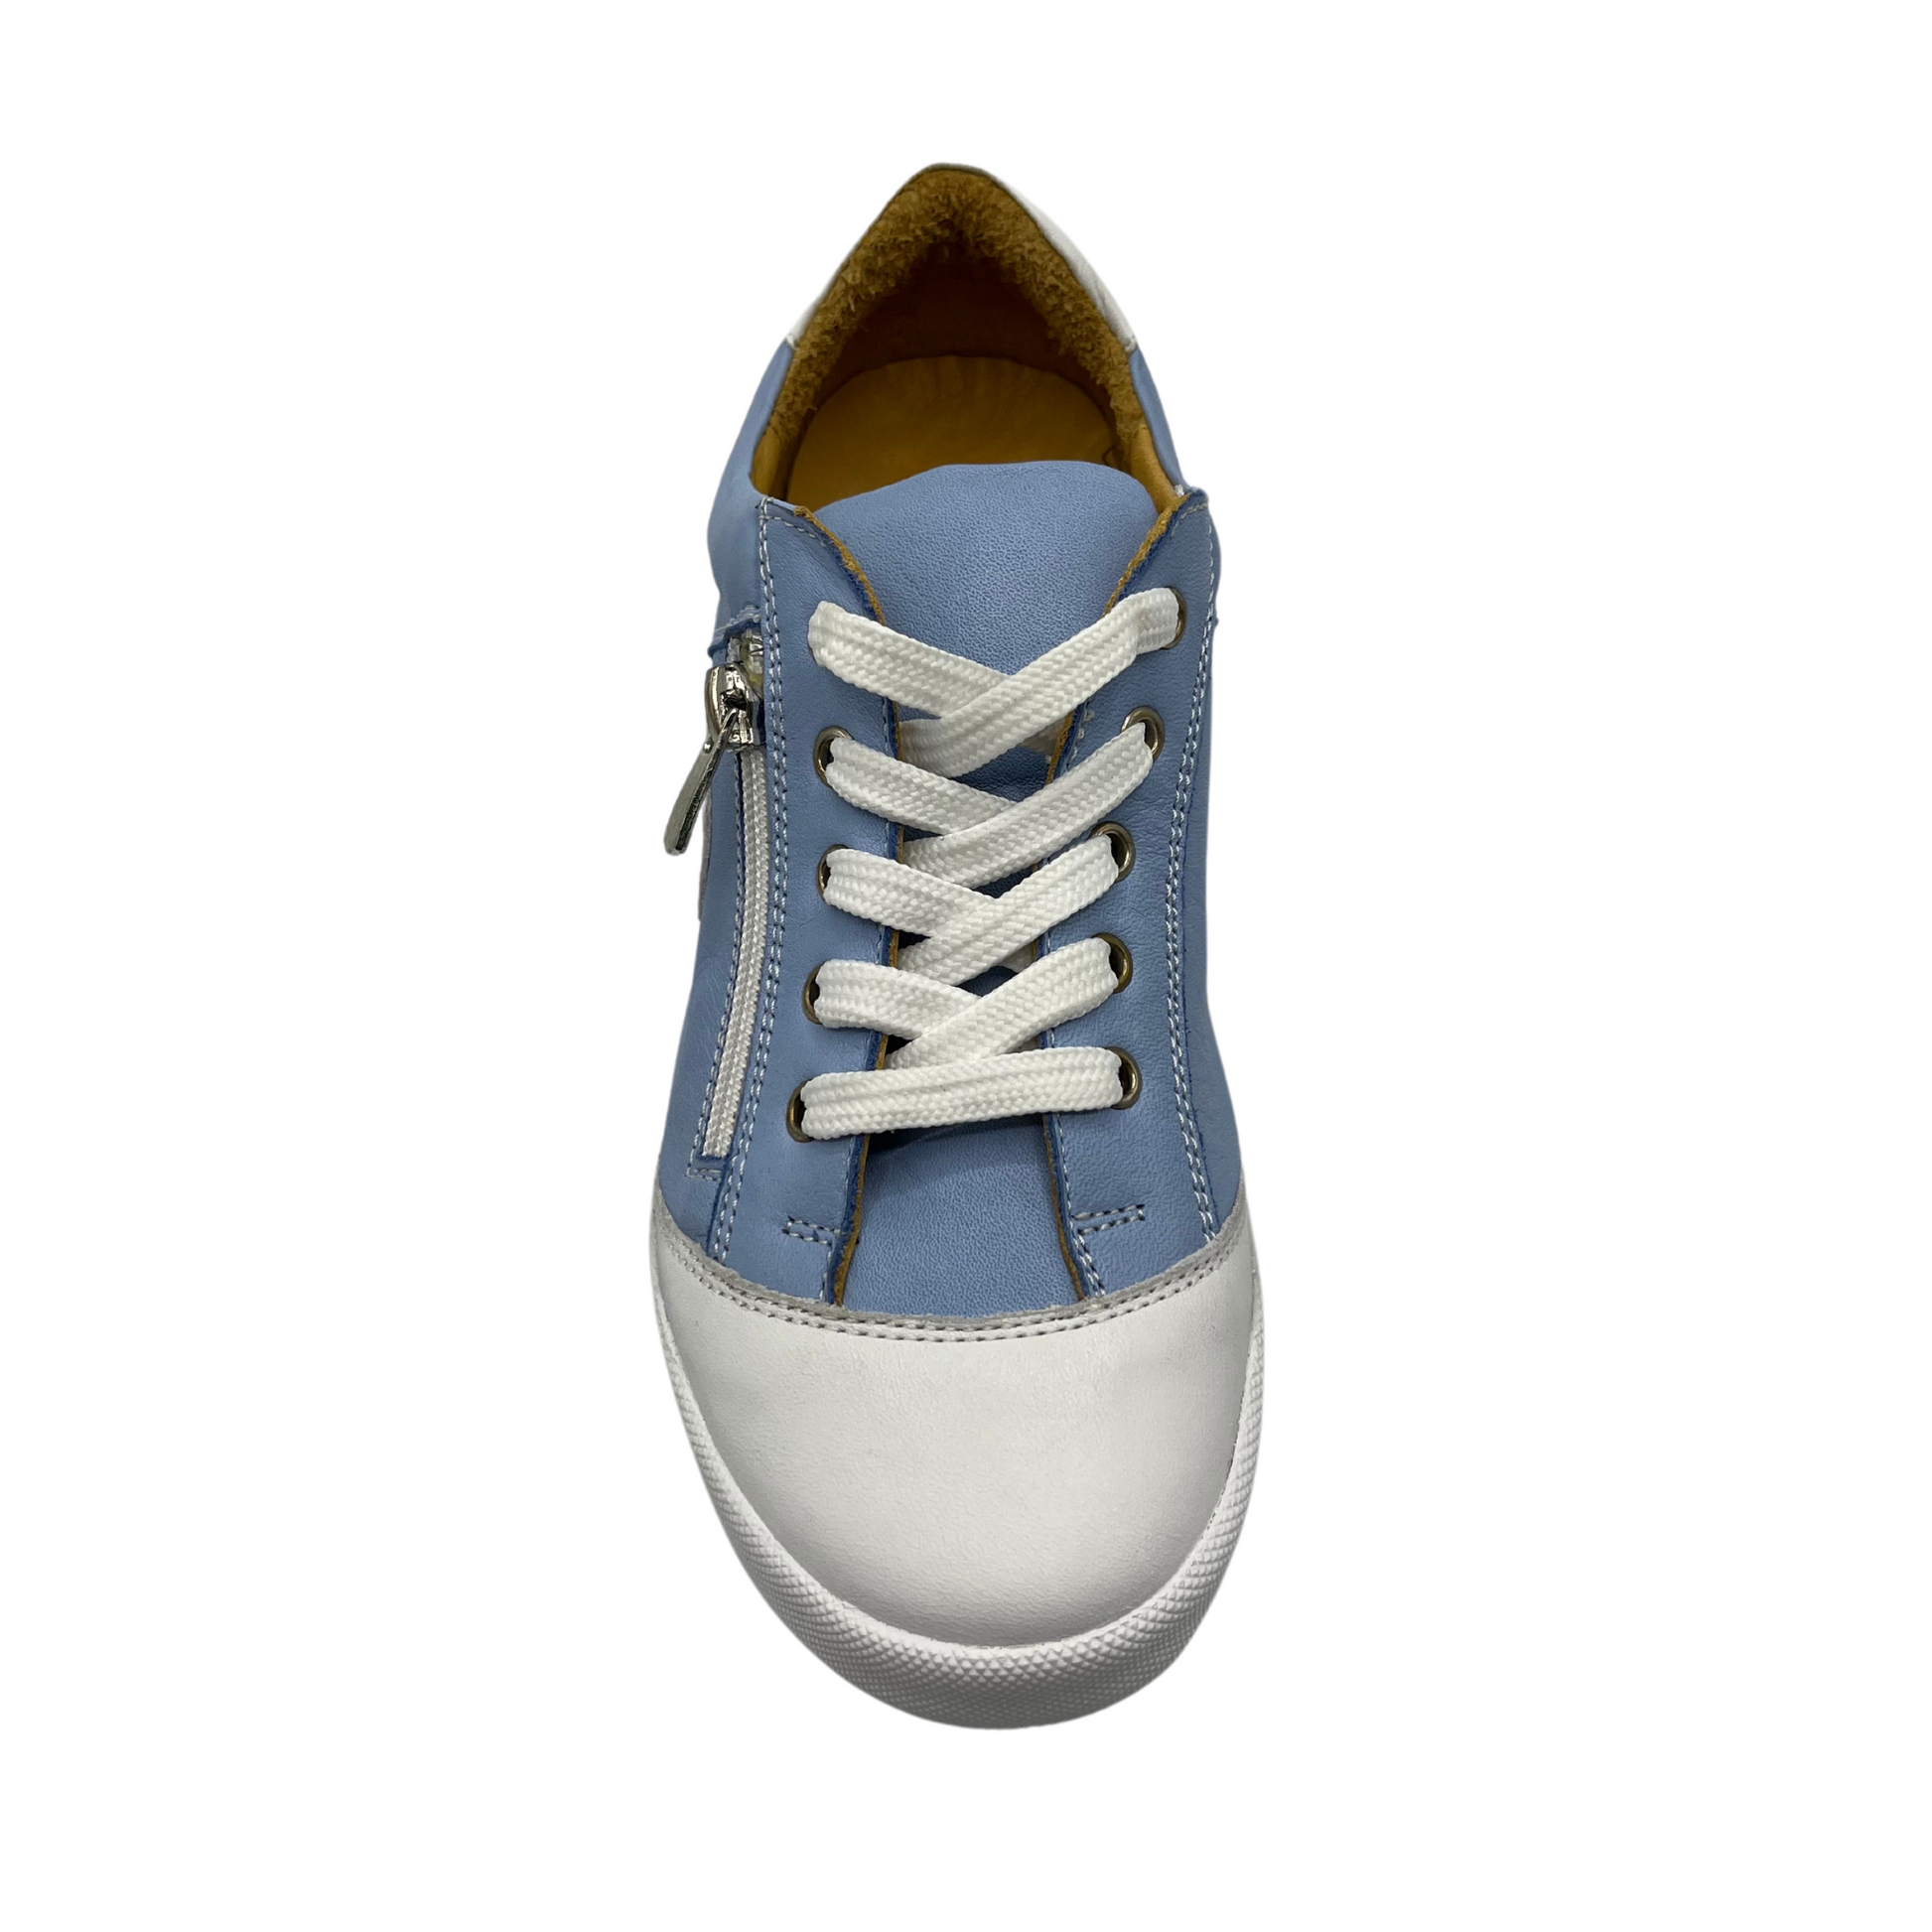 Top view of blue and white leather sneaker. It has tan leather lining and side zipper along laces. White rubber outsole and white leather toe cap.